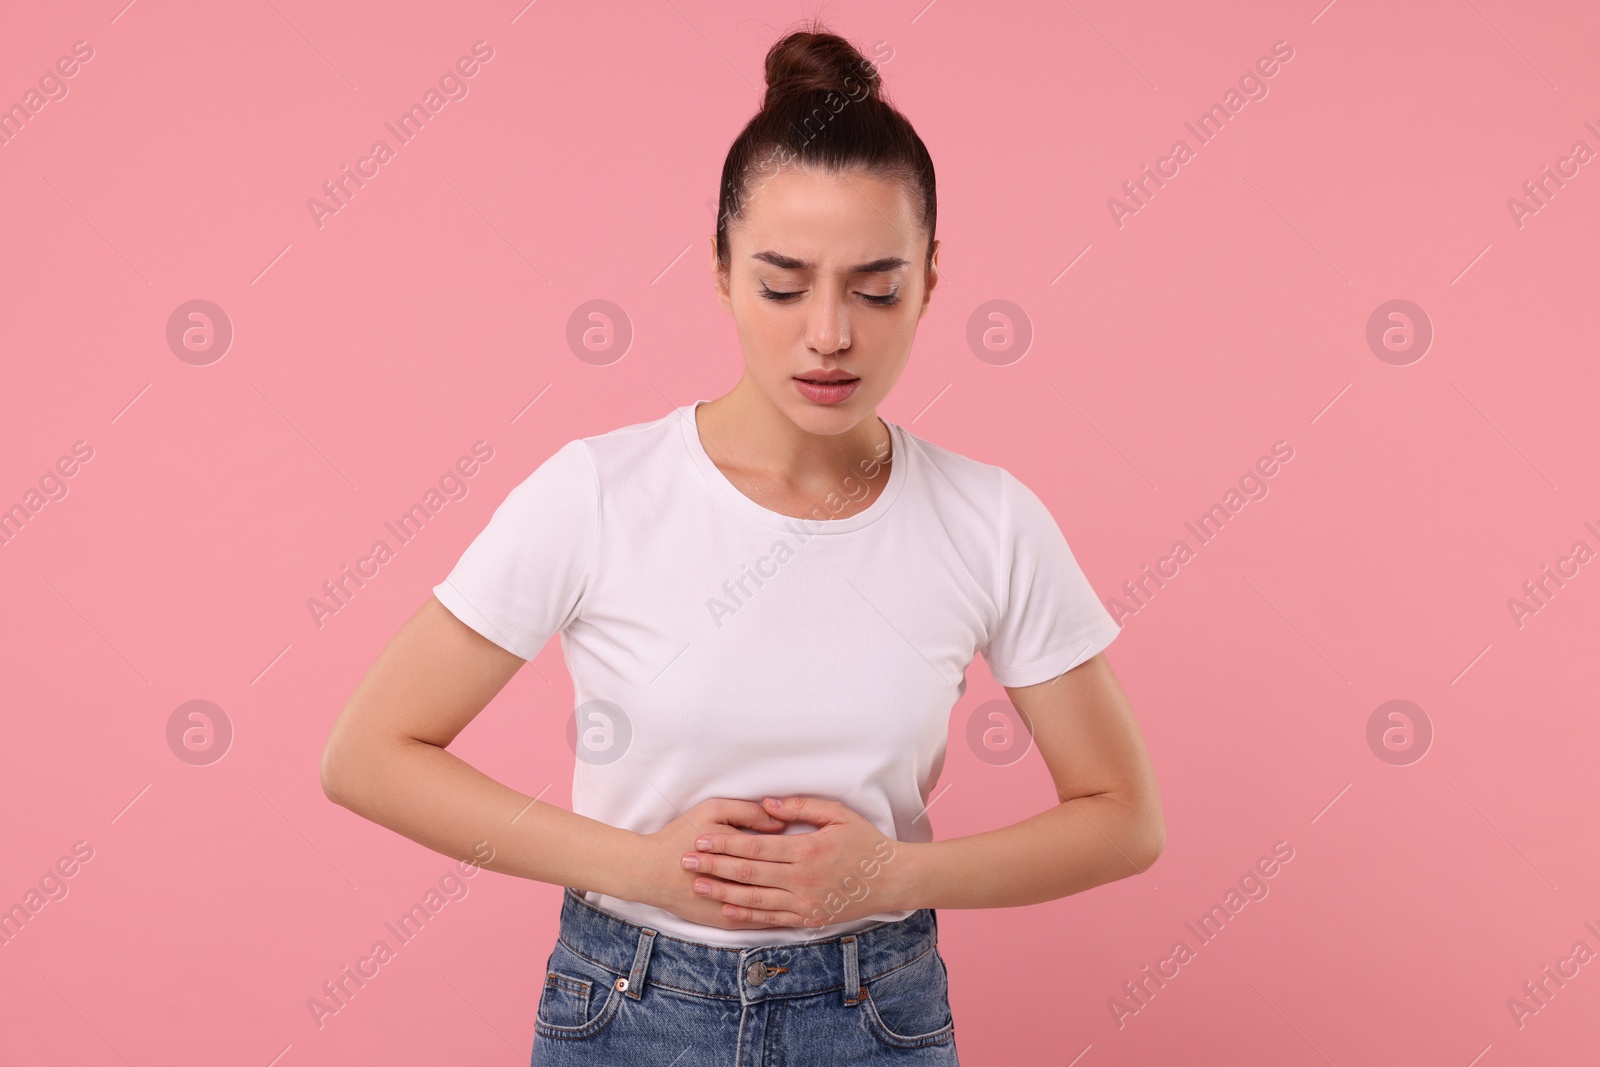 Photo of Woman suffering from abdominal pain on pink background. Unhealthy stomach